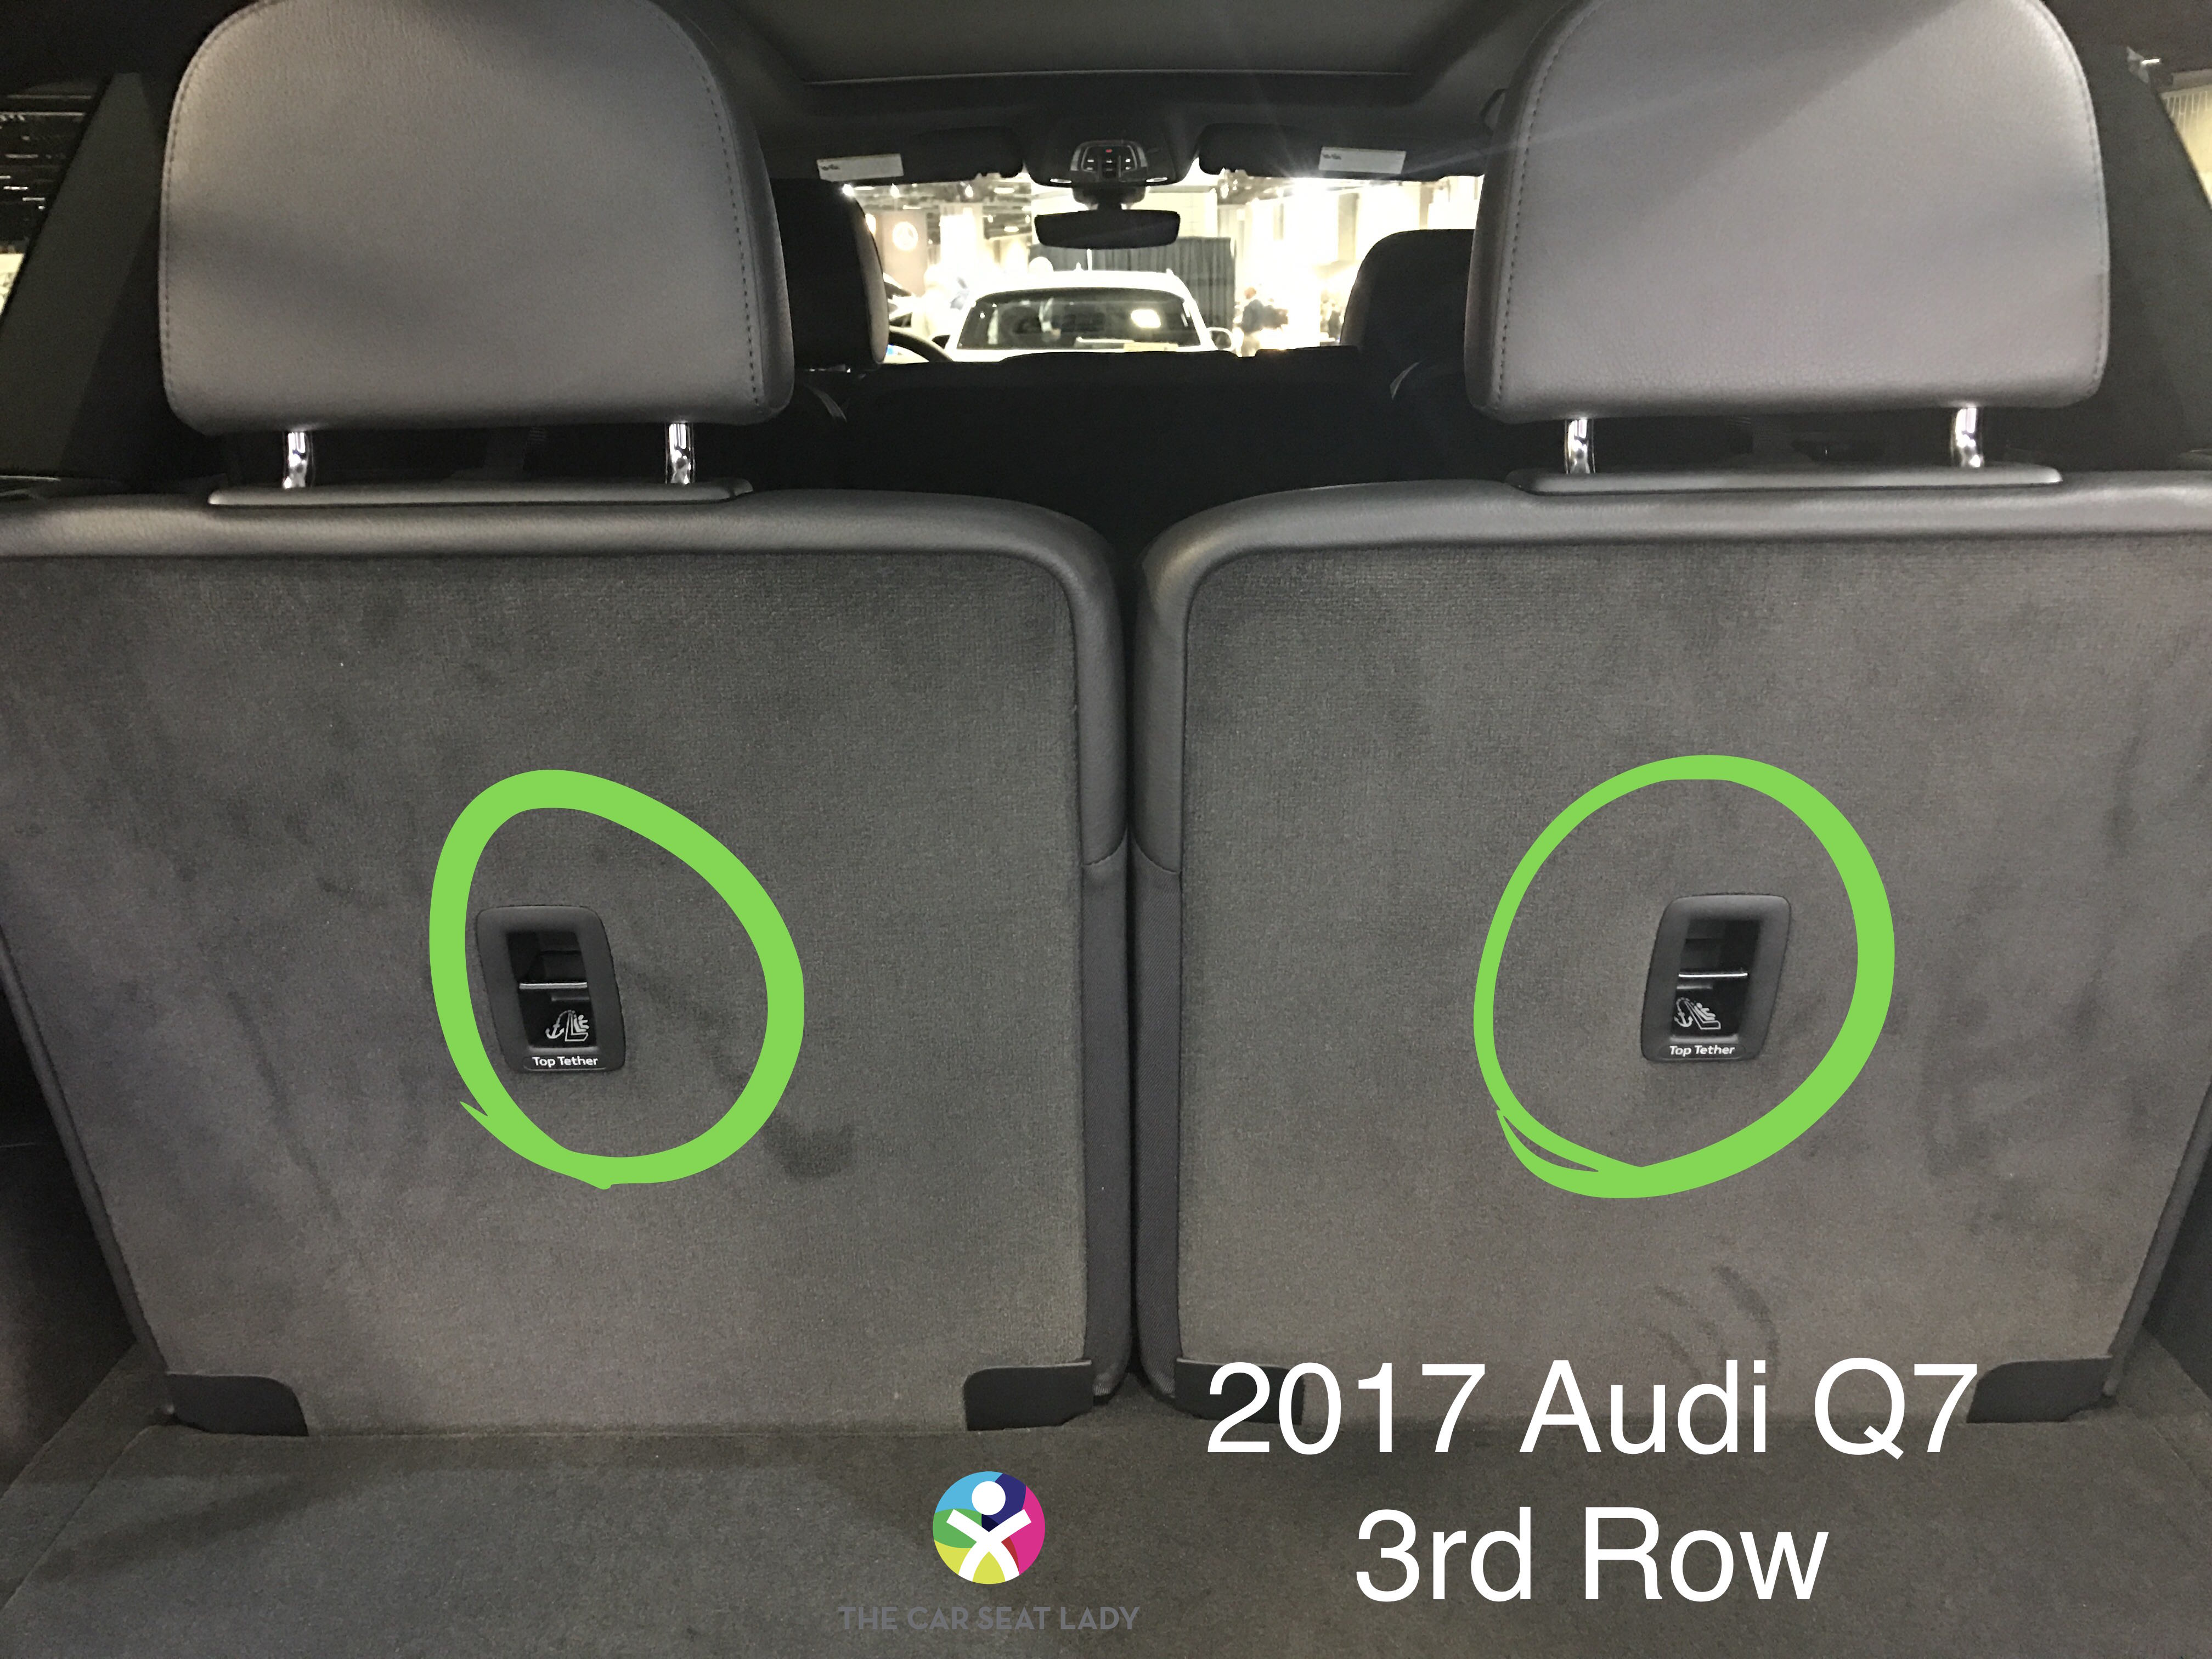 https://thecarseatlady.com/wp-content/uploads/2017/04/2017-Audi-Q7-3rd-row-tethers.jpg